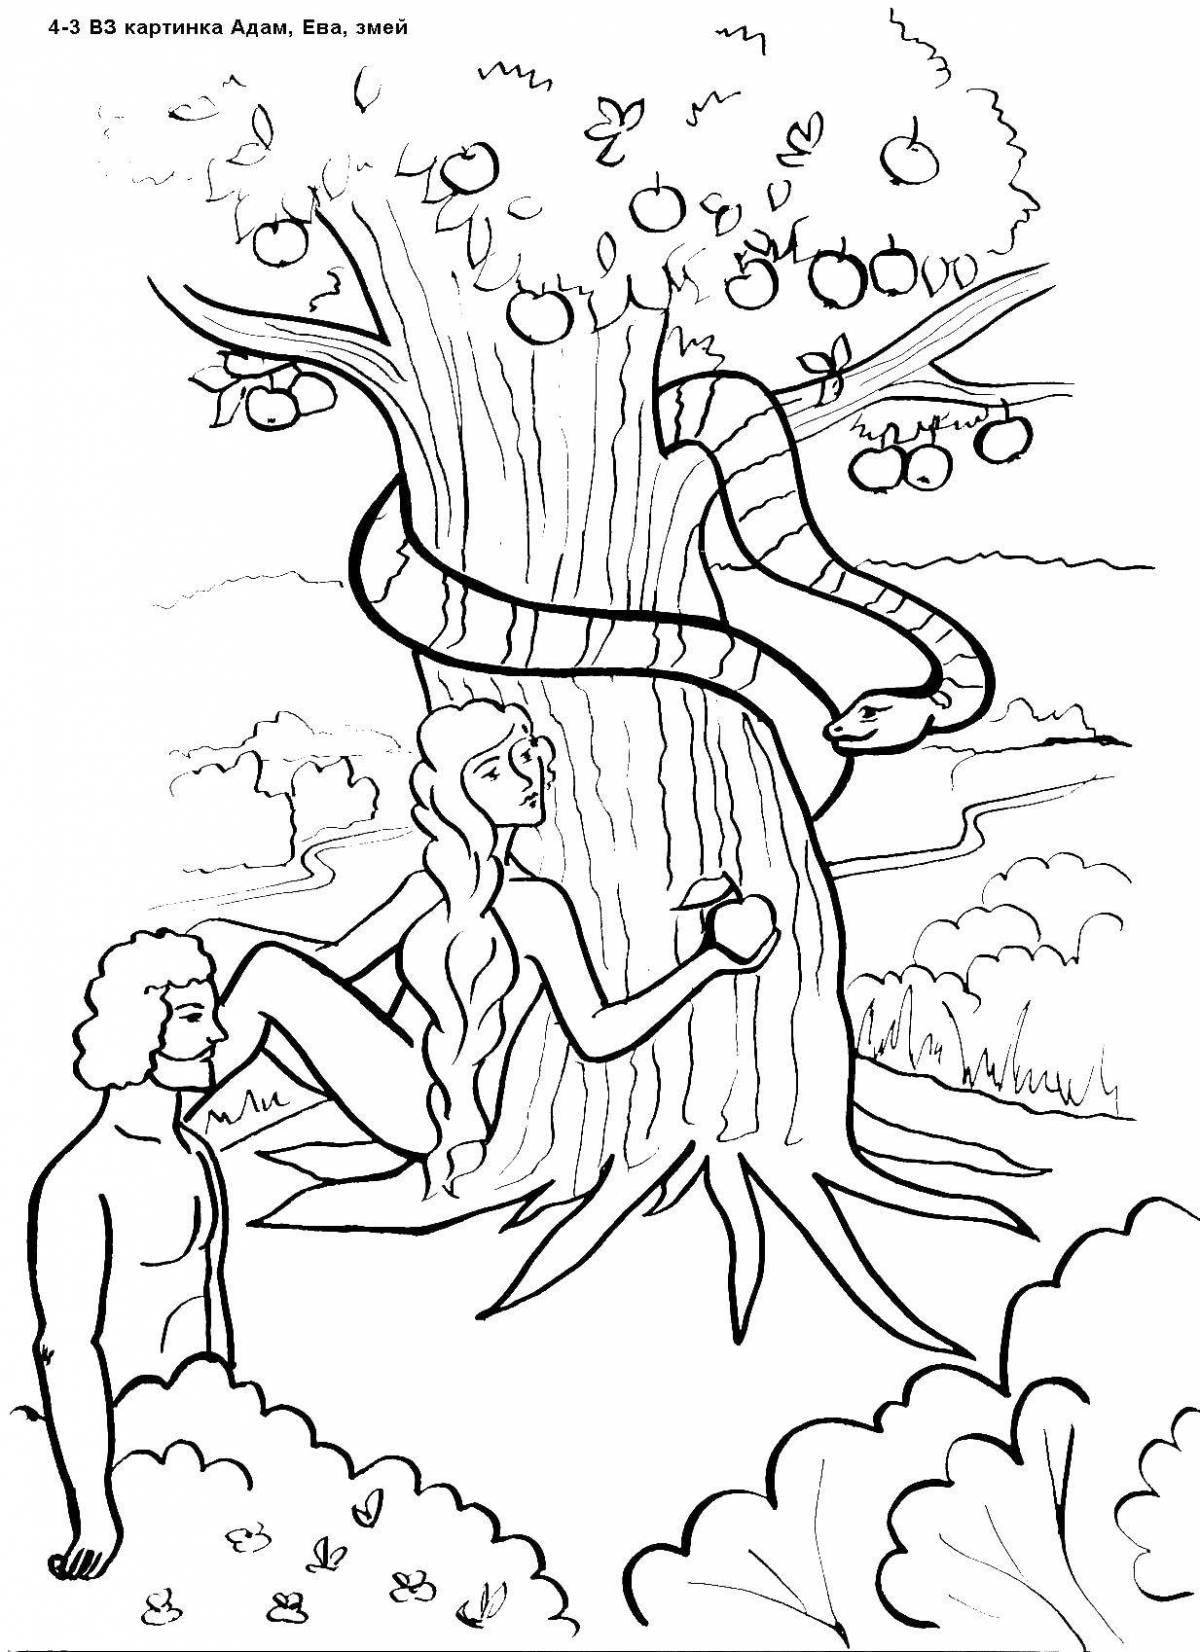 Bright coloring adam and eve